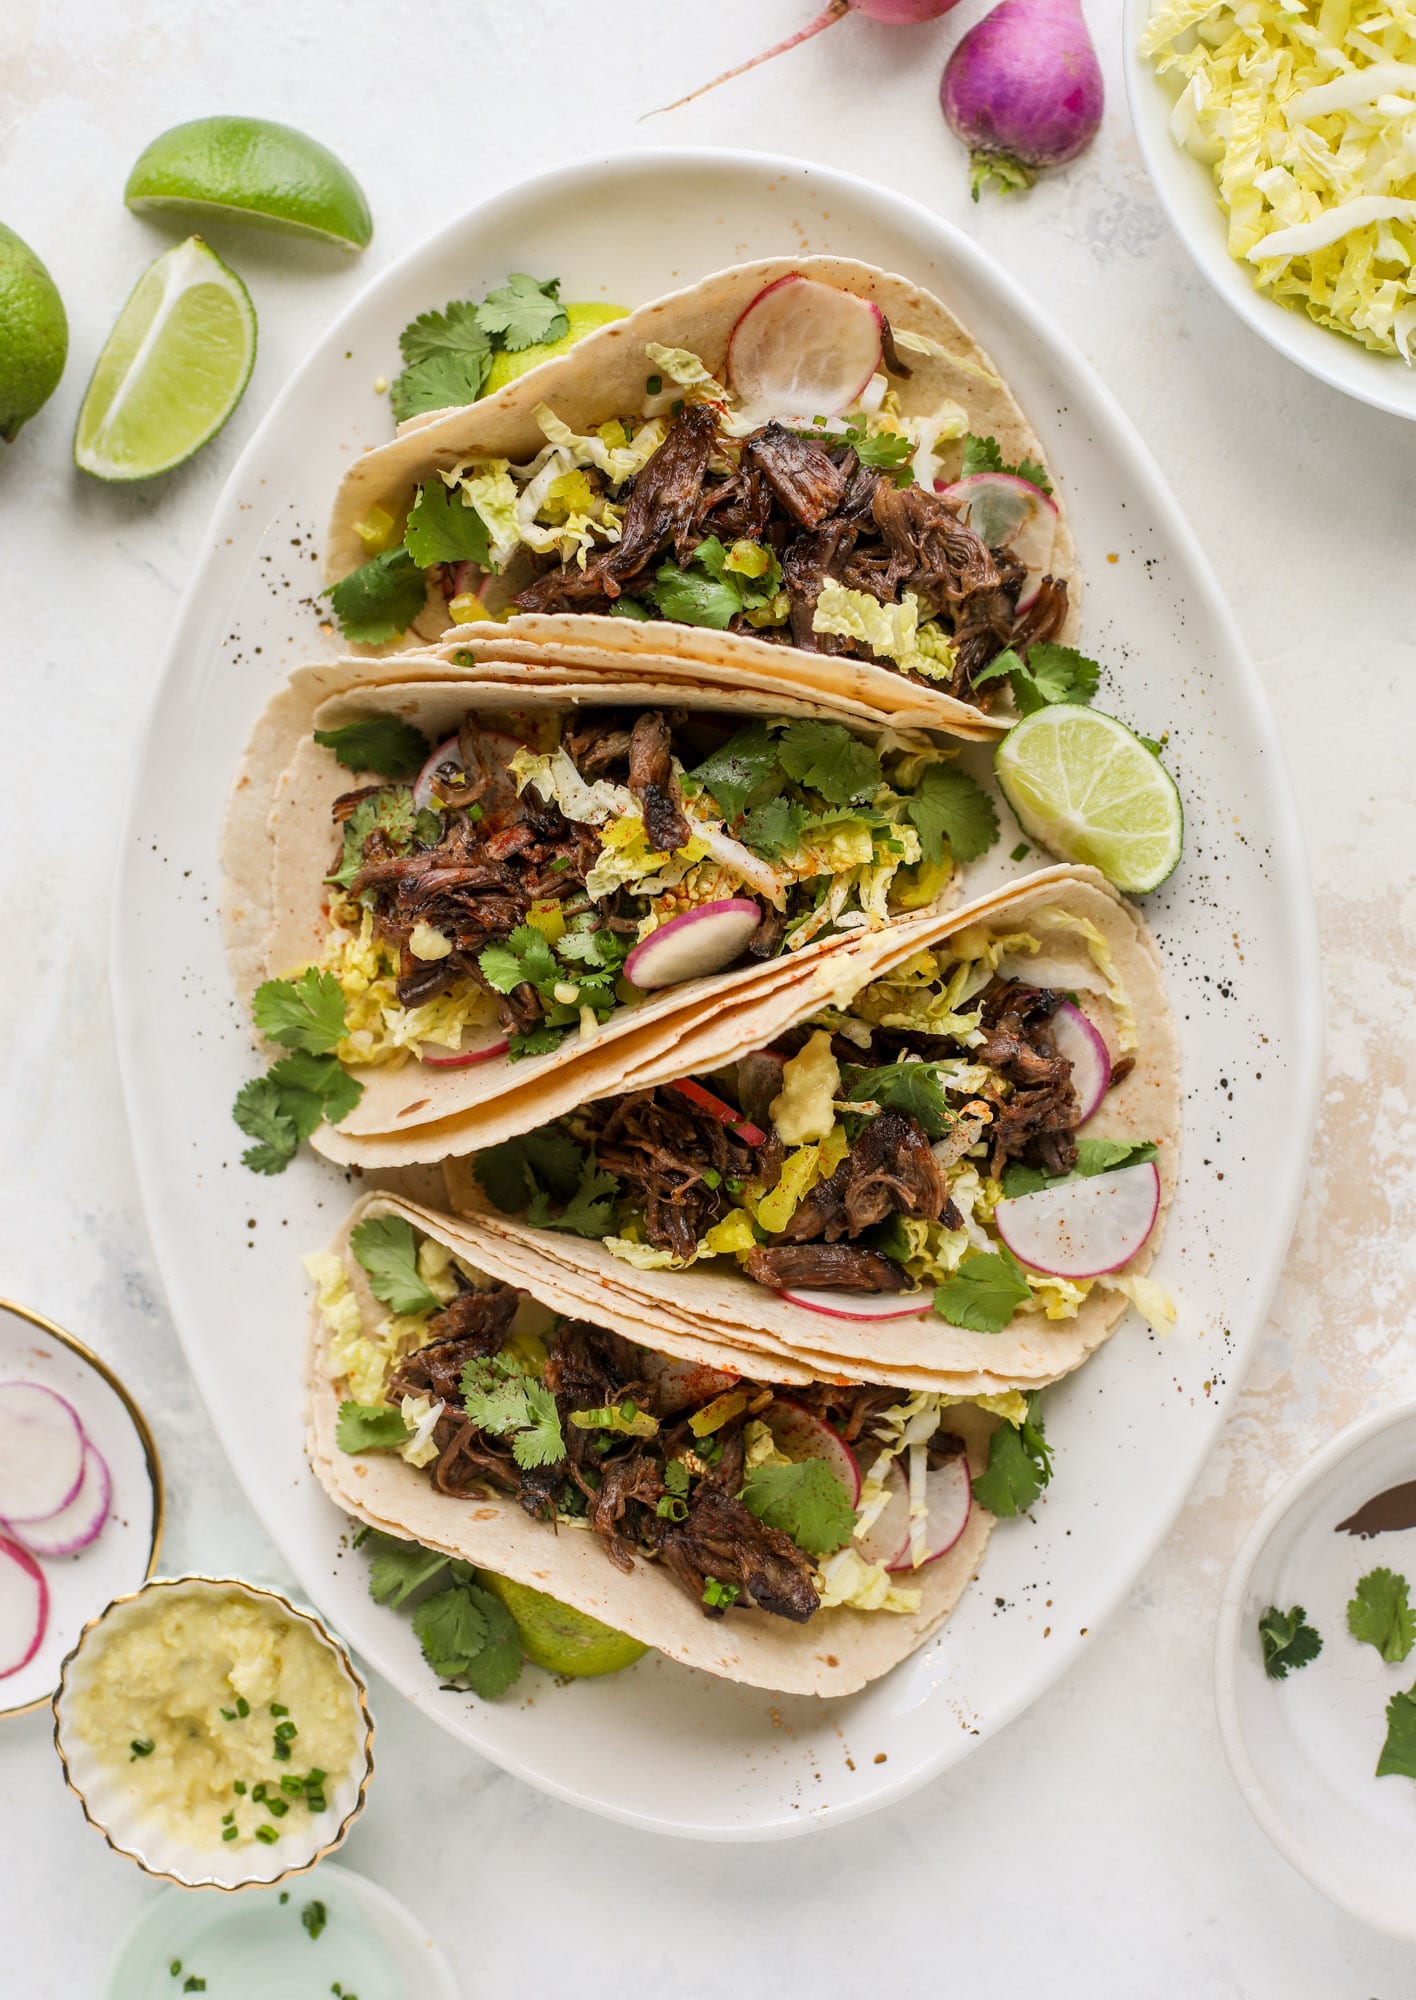 These are the best smoky short rib tacos made in the slow cooker! Served with a banana pepper mustard and napa cabbage slaw, it's a flavor explosion.